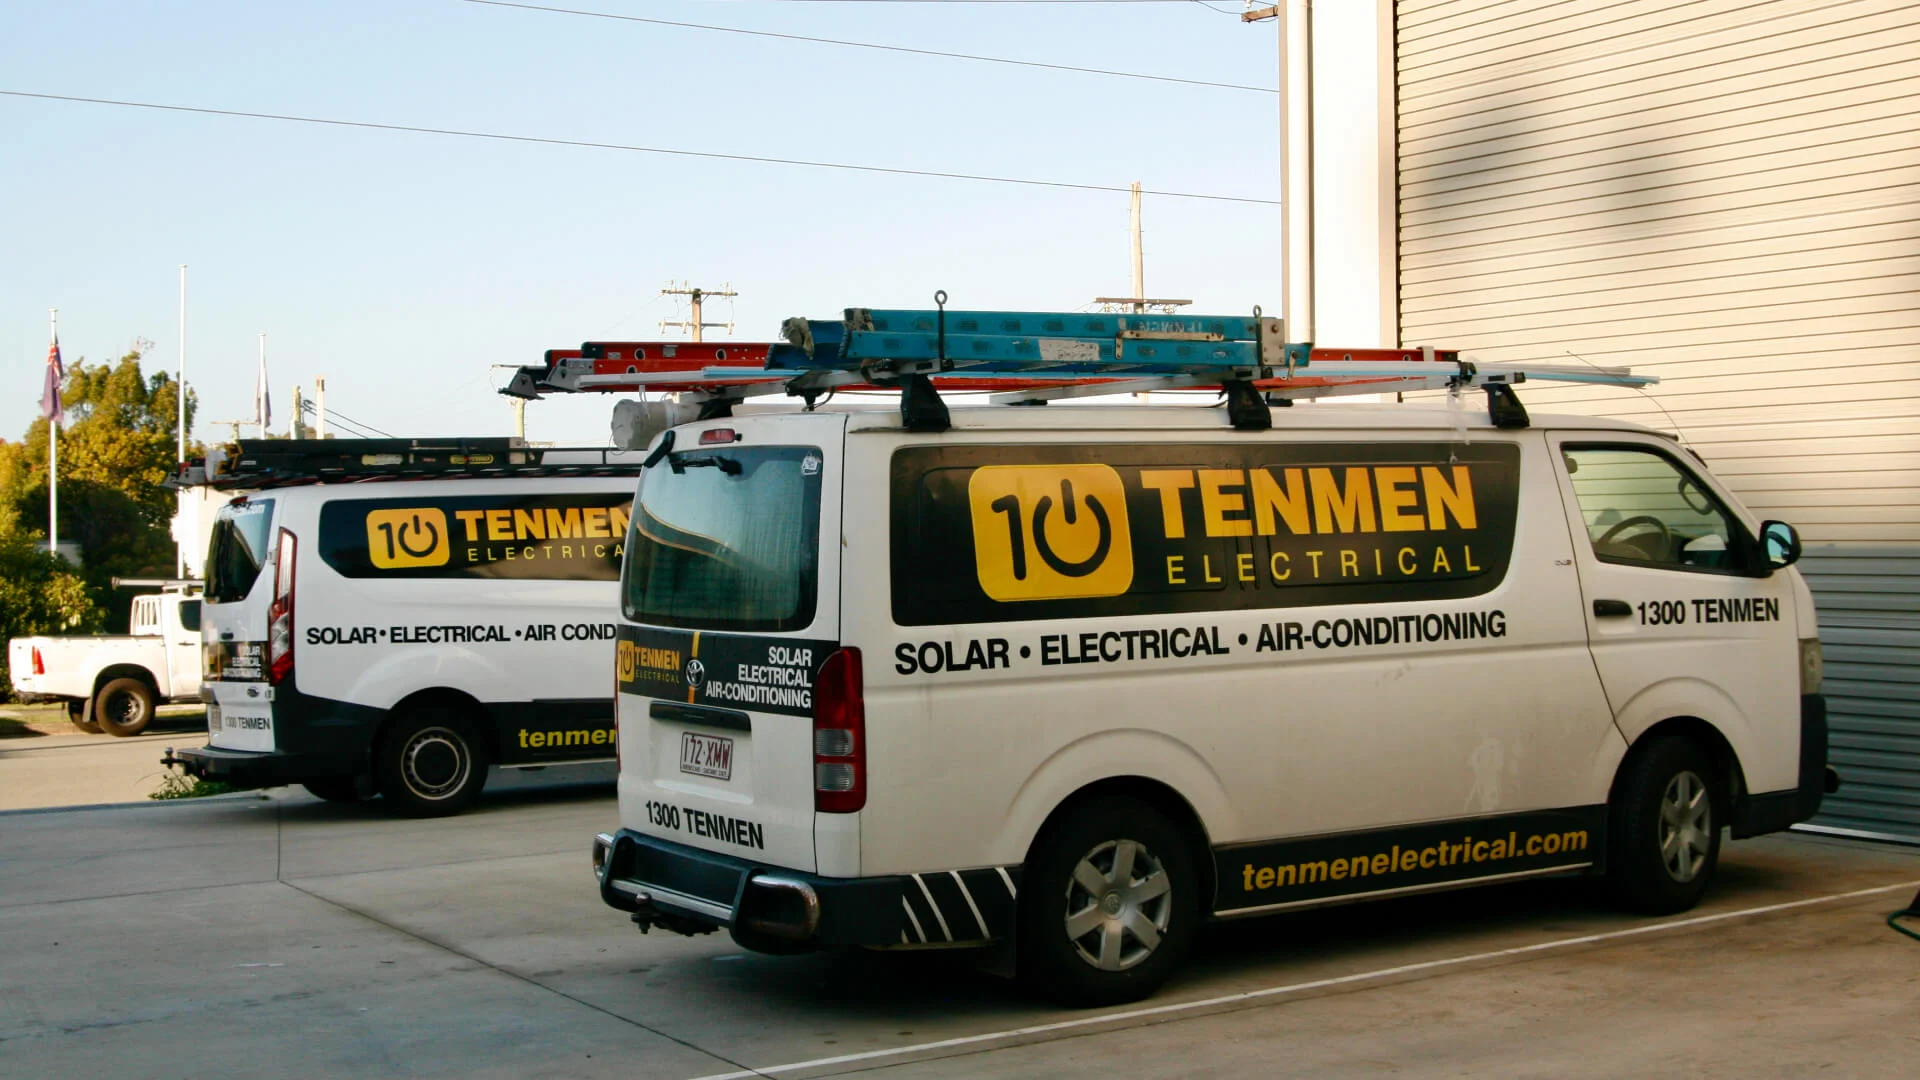 Two Tenmen Electrical vans parked in front of their building on the Sunshine Coast